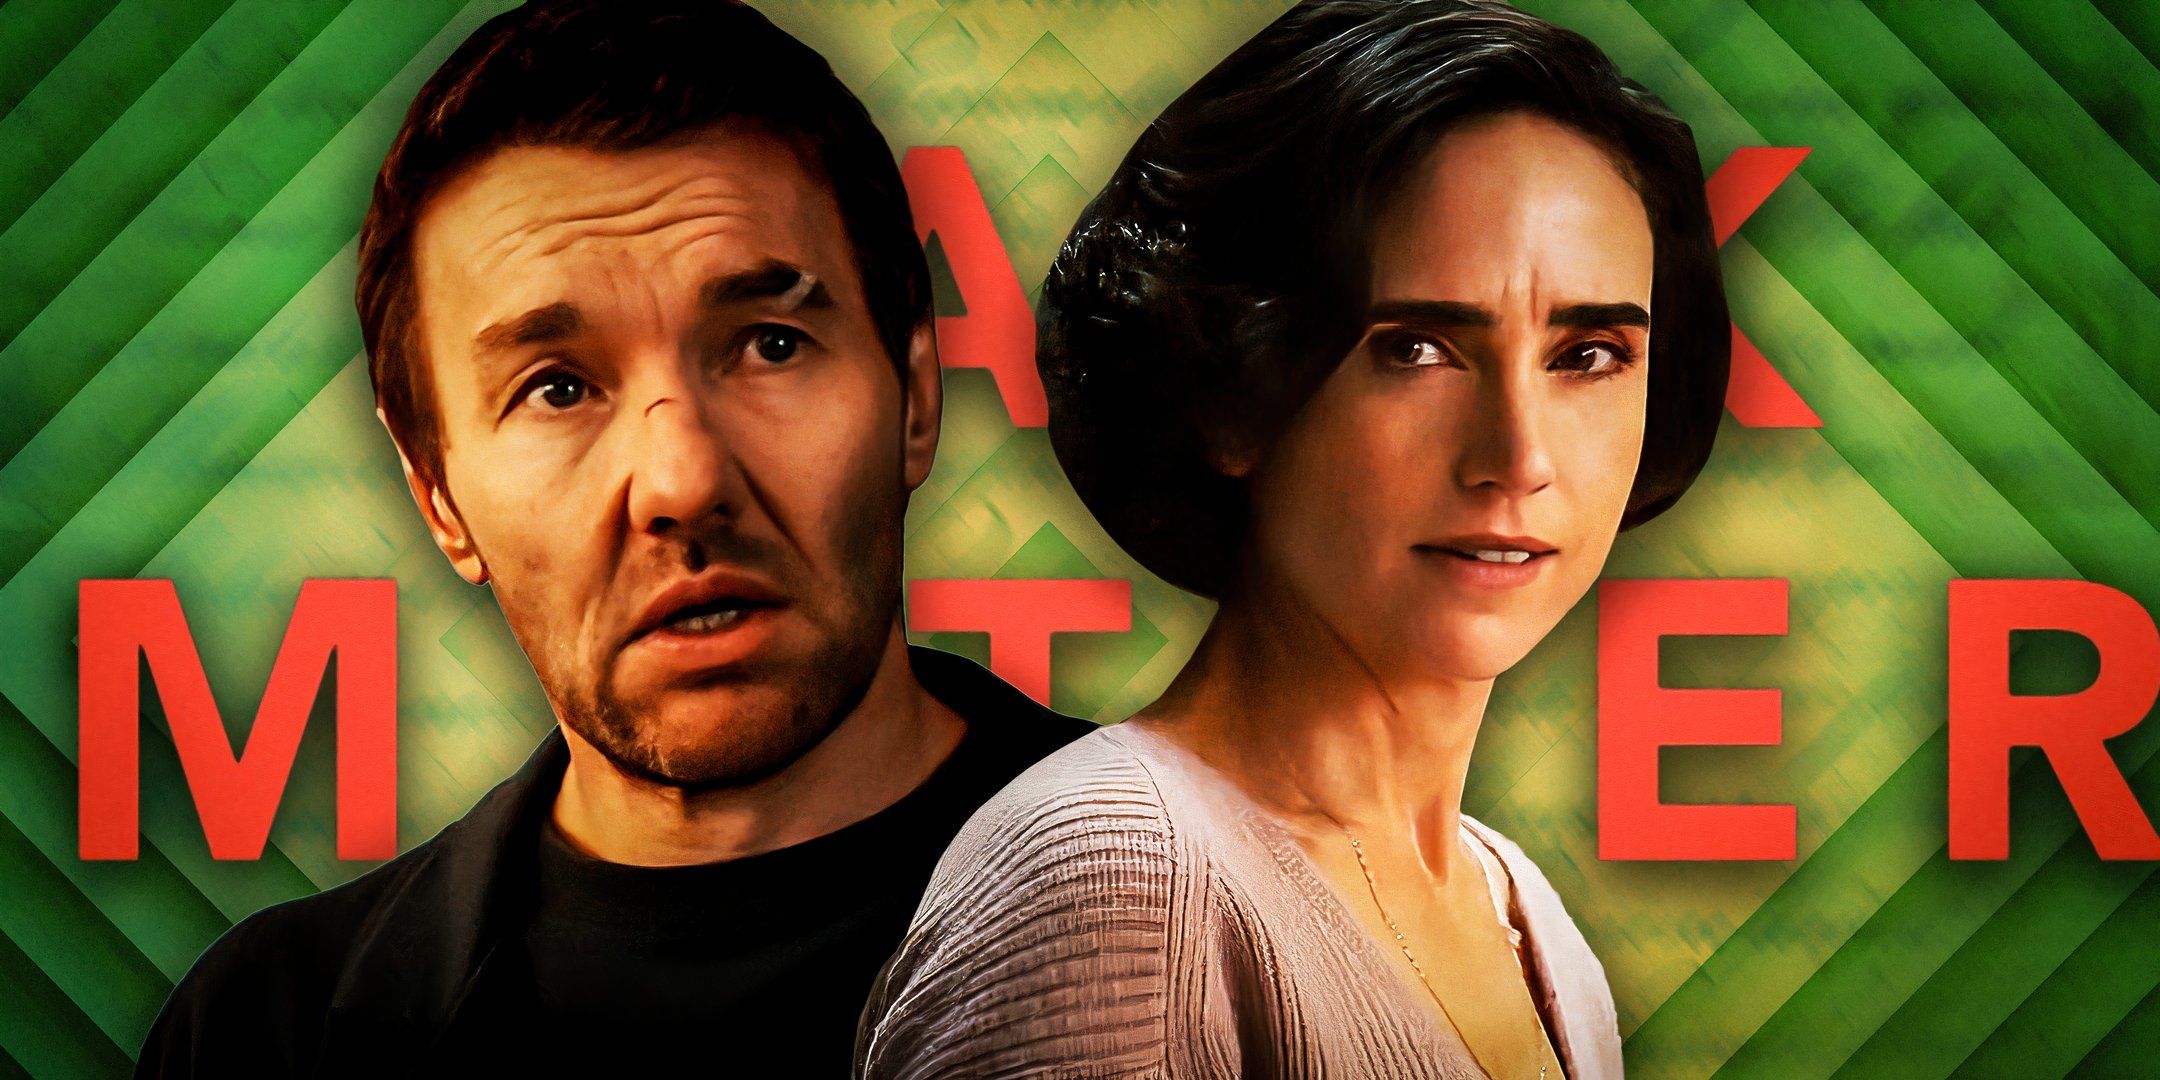 A custom image of Joel Edgerton as Jason Dessen and Jennifer Connelly as Daniela Vargas against a backdrop of the Dark Matter book cover